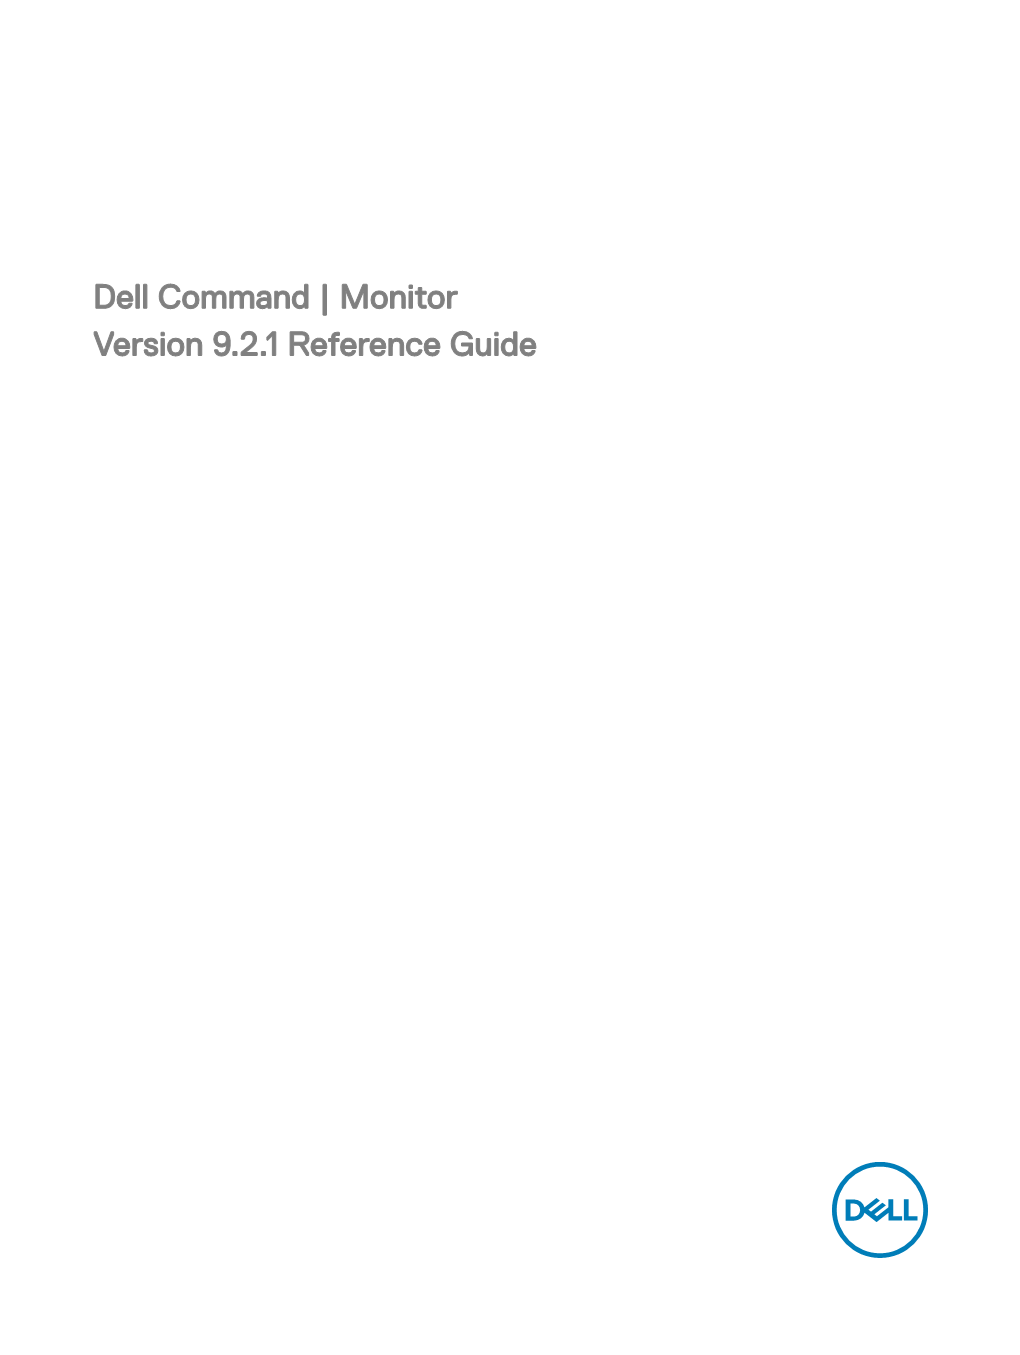 Dell Command | Monitor Version 9.2.1 Reference Guide Notes, Cautions, and Warnings